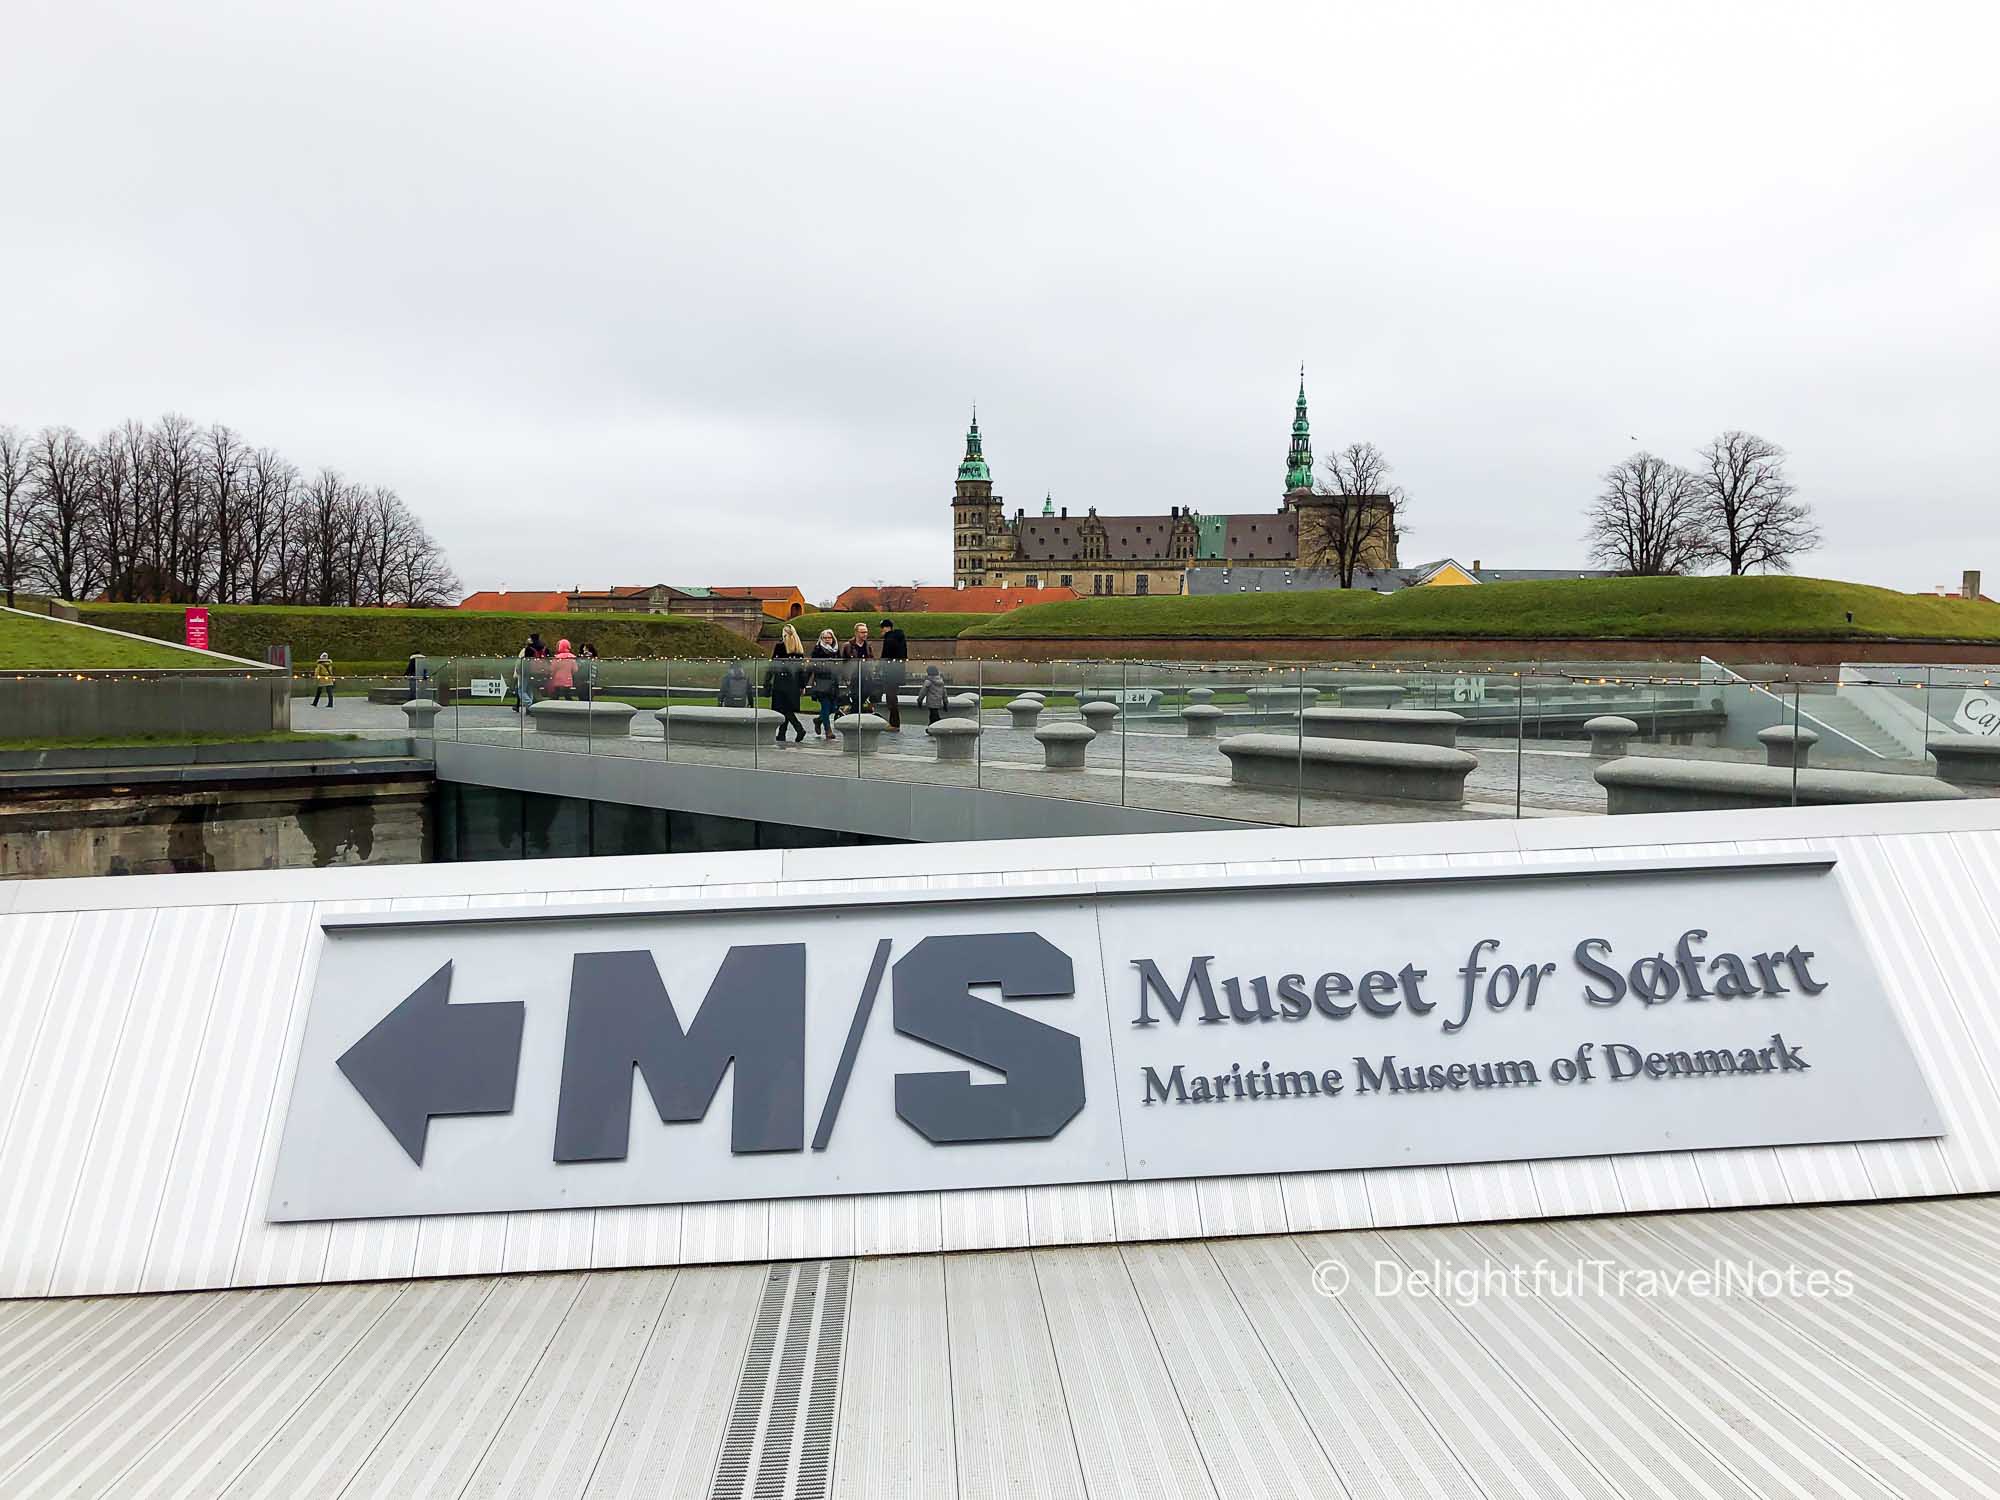 Sign of Maritime Museum of Denmark in Helsingor with Kronborg Castle in the background.